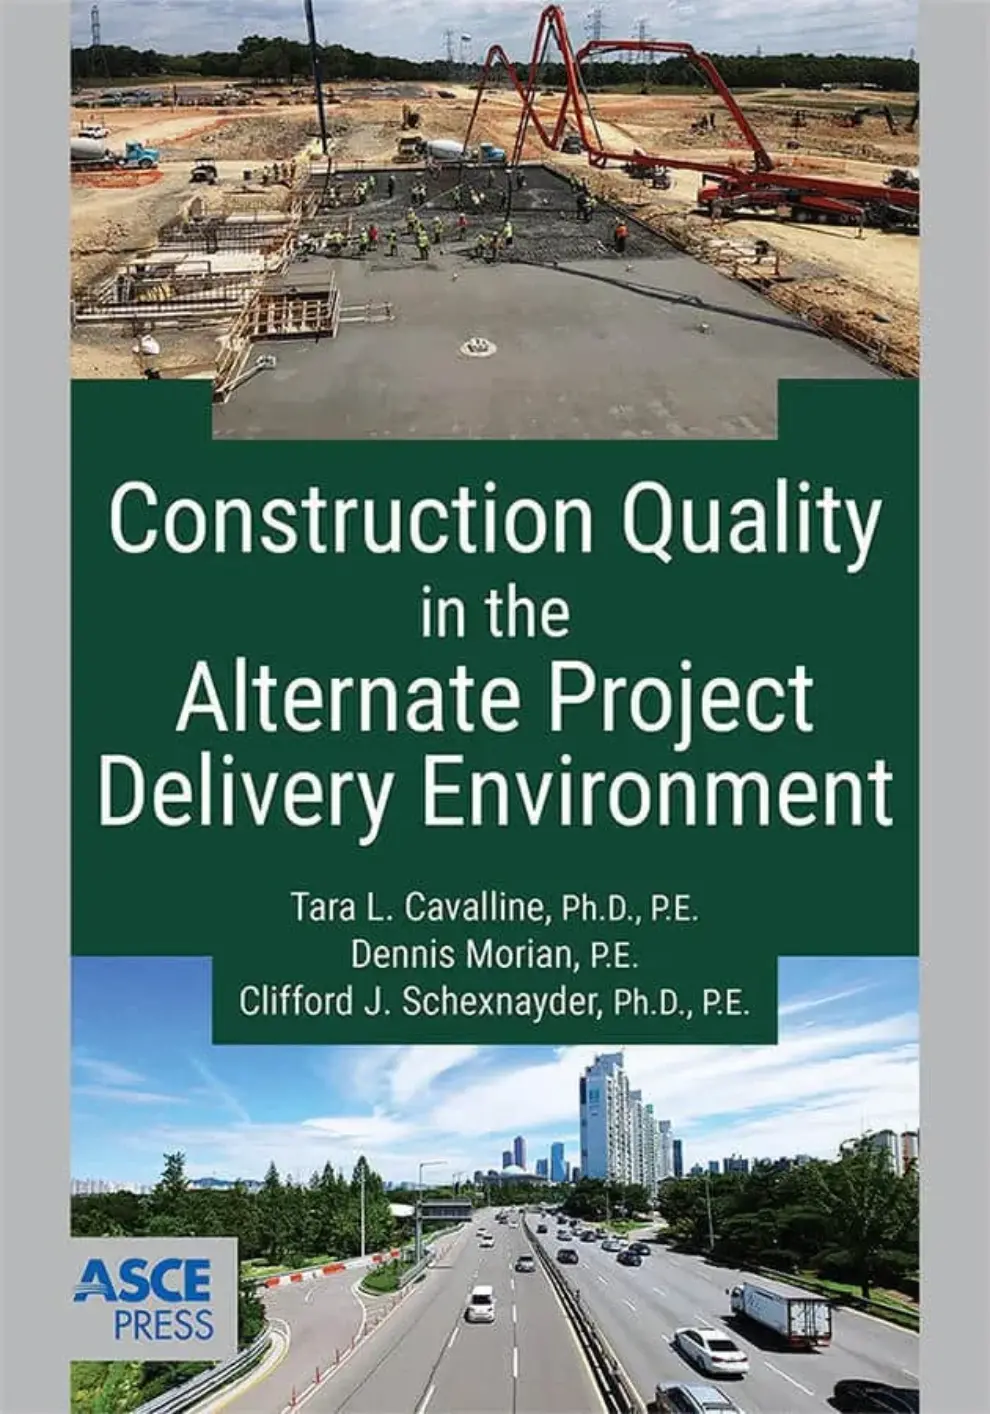 New ASCE Press Book Provides Guidance on Construction Quality